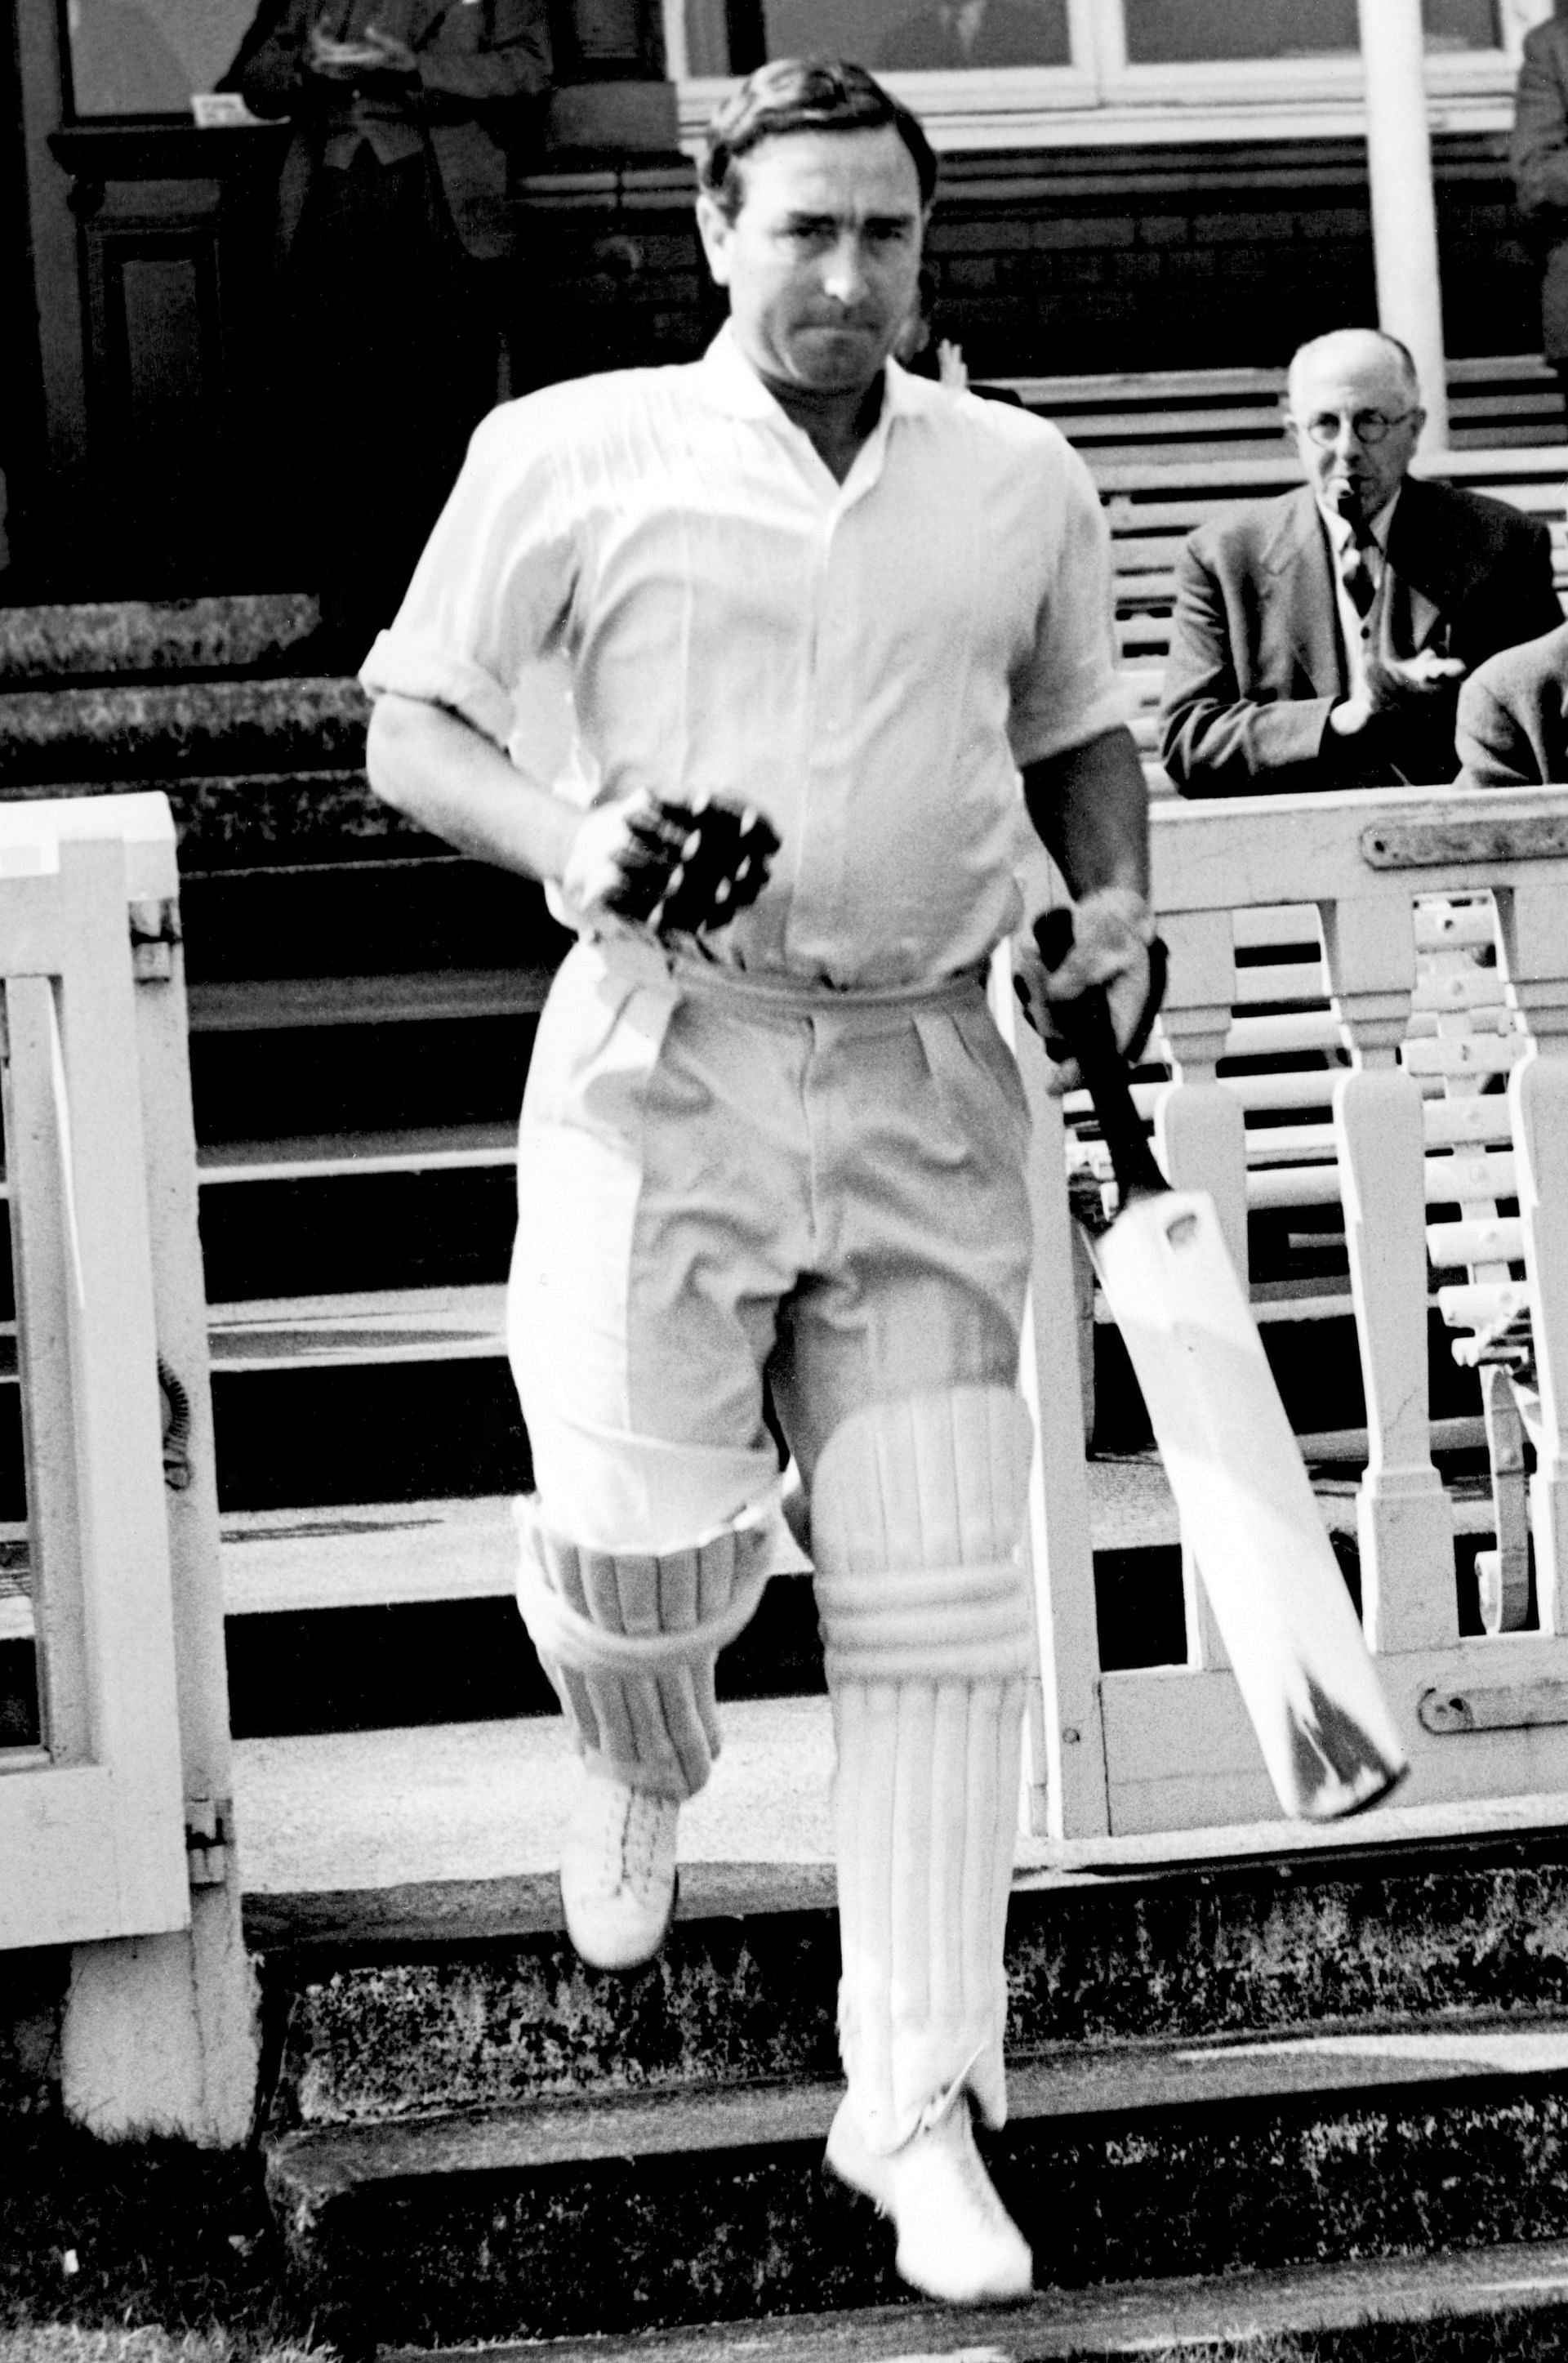 Denis Compton was a dashing and courageous batsman